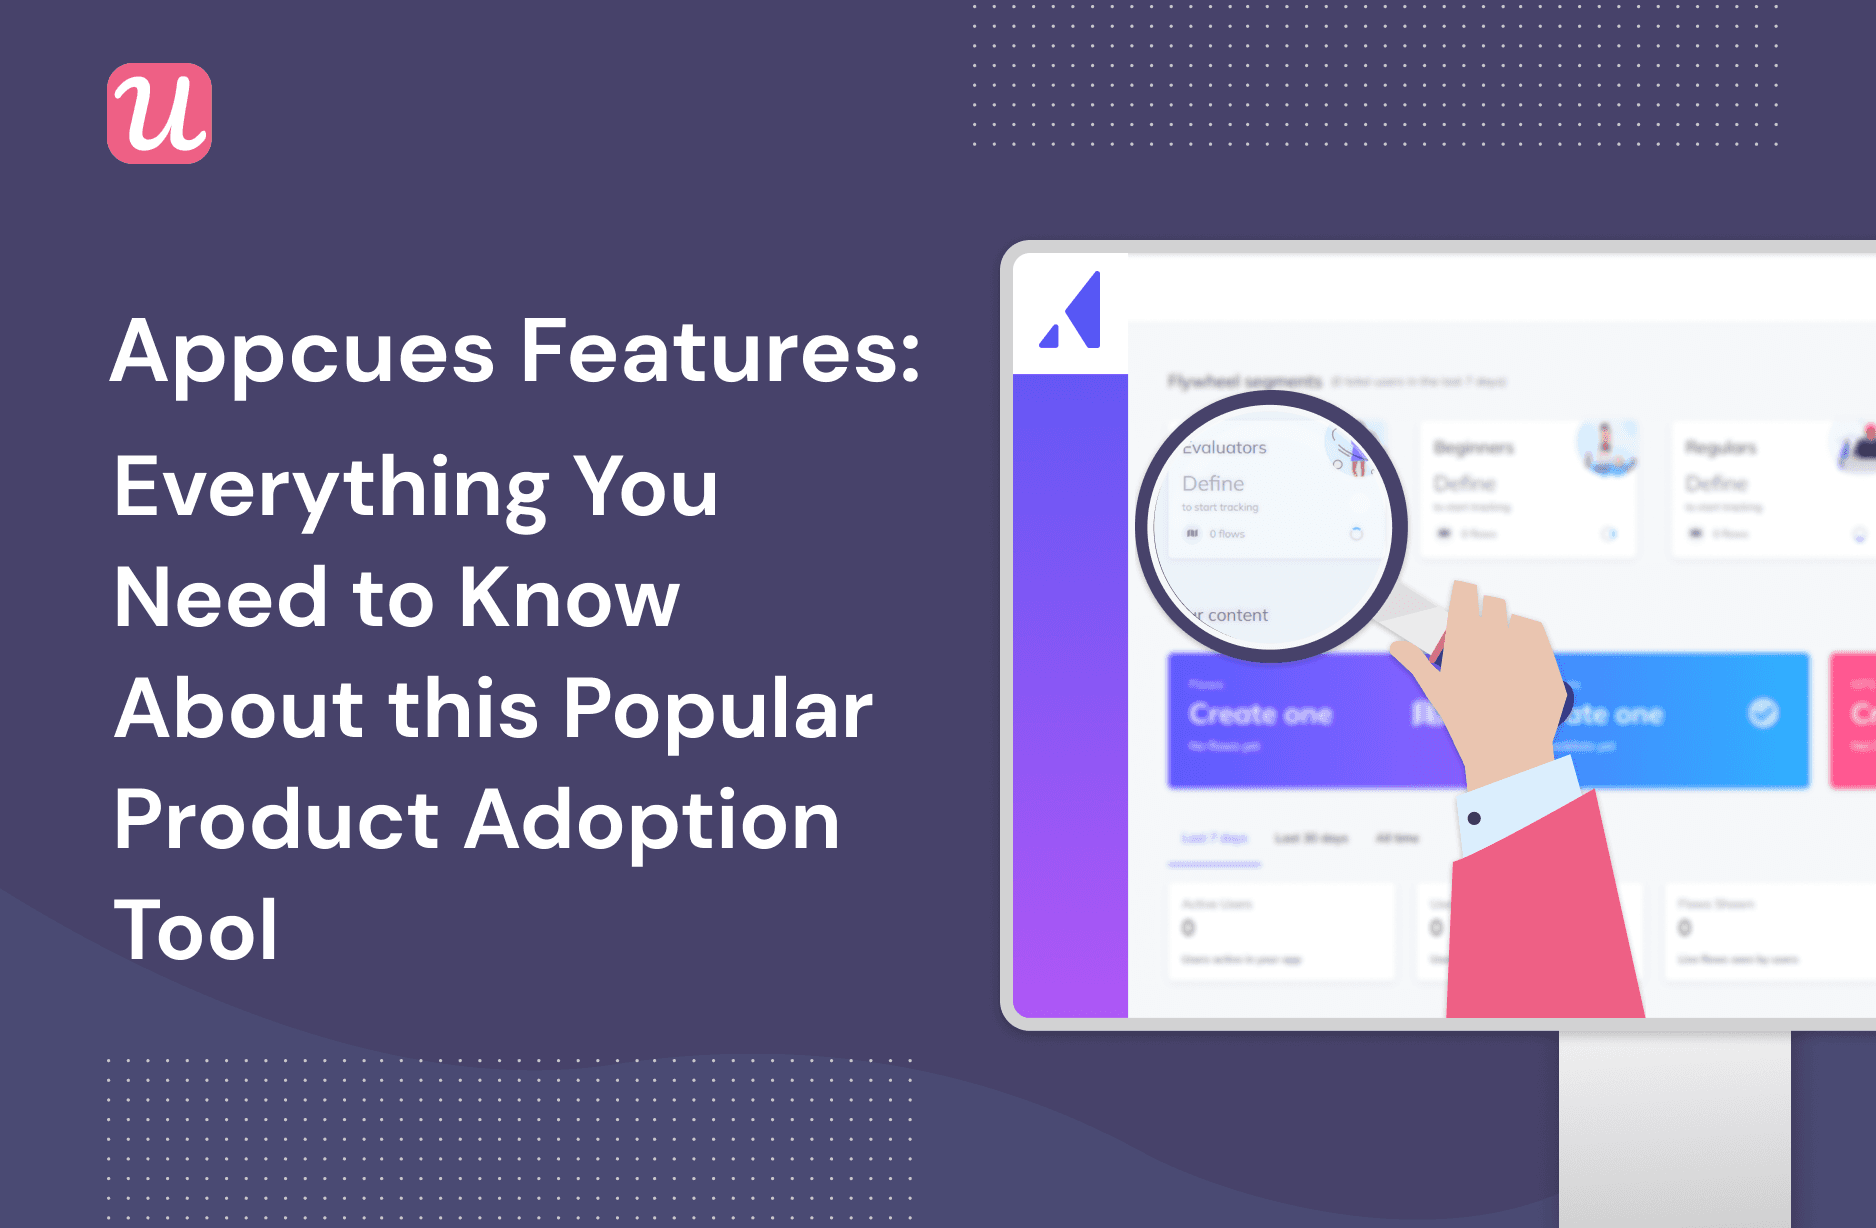 Appcues Features: Everything You Need to Know About This Popular Product Adoption Tool